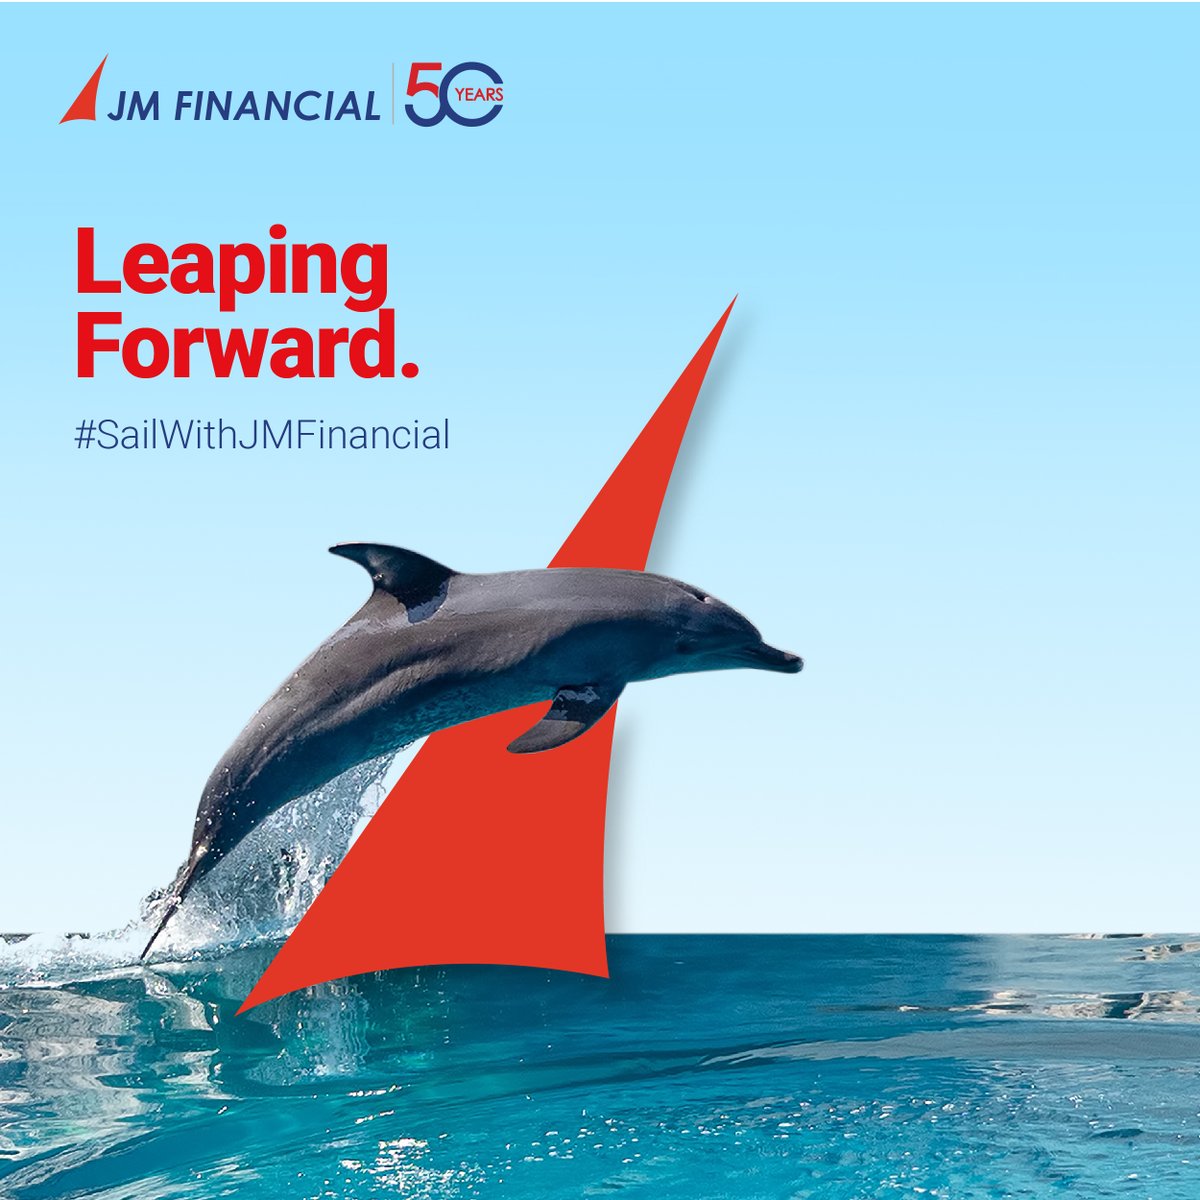 With each leap, we move closer to accomplishing our goals.
#JMFinancial #50yearsofJMFinancial #SailWithJMFinancial